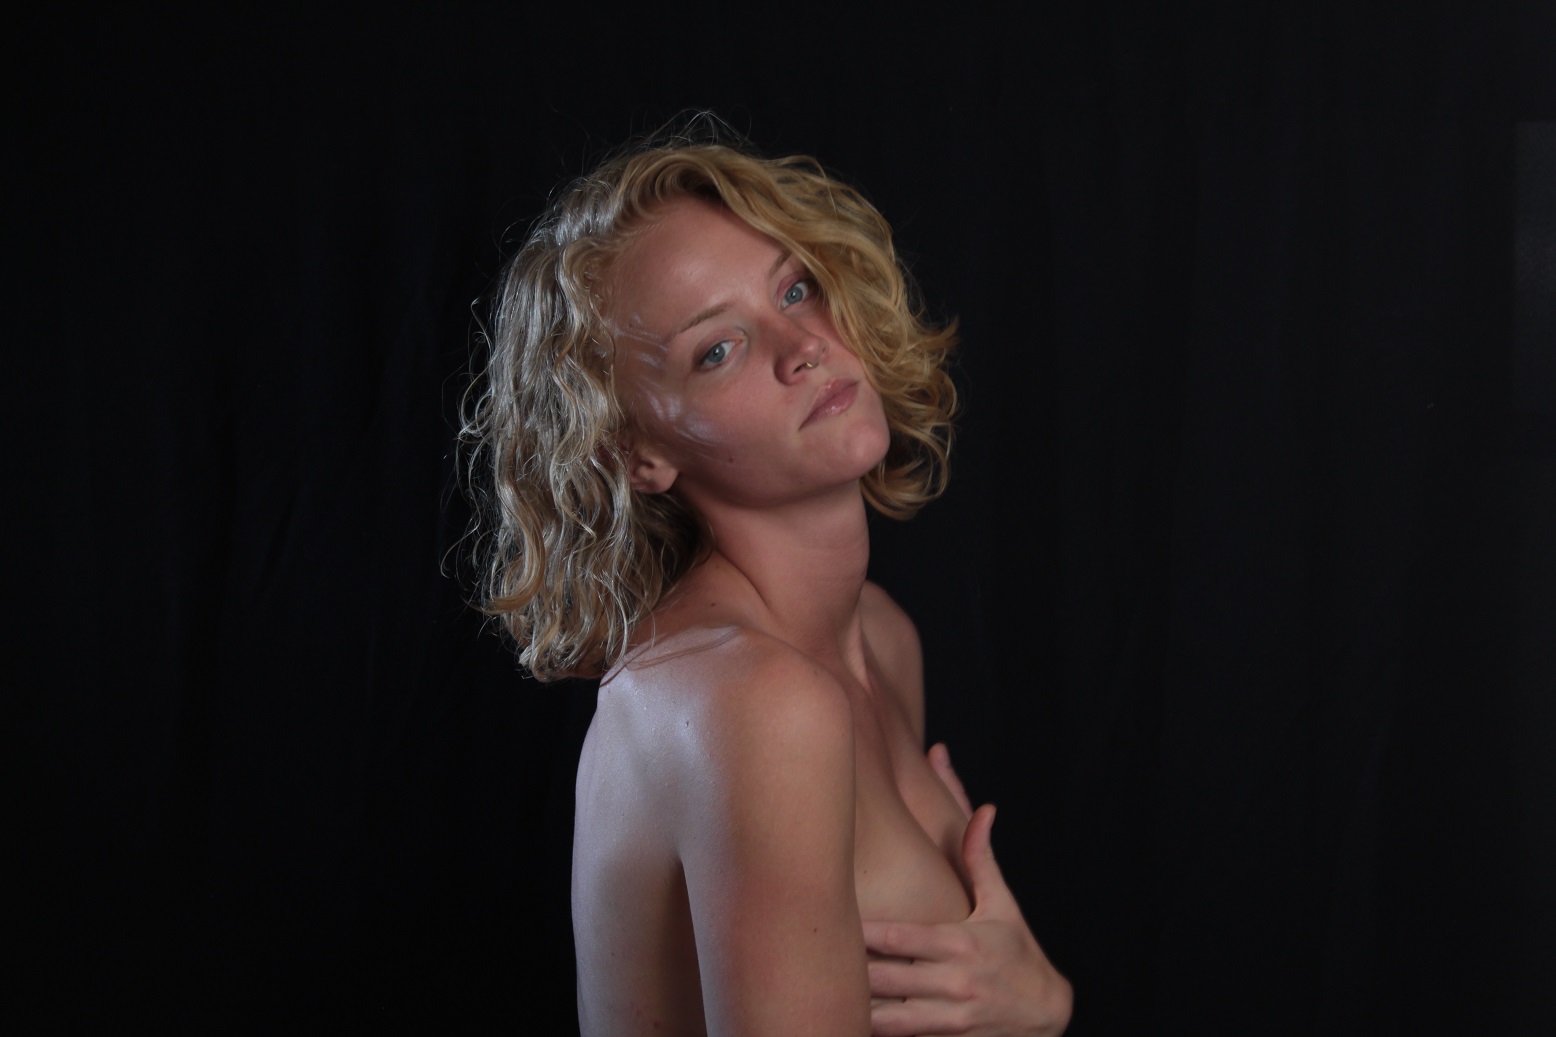 Photo of Kay, implied nude pose, in front of a backdrop